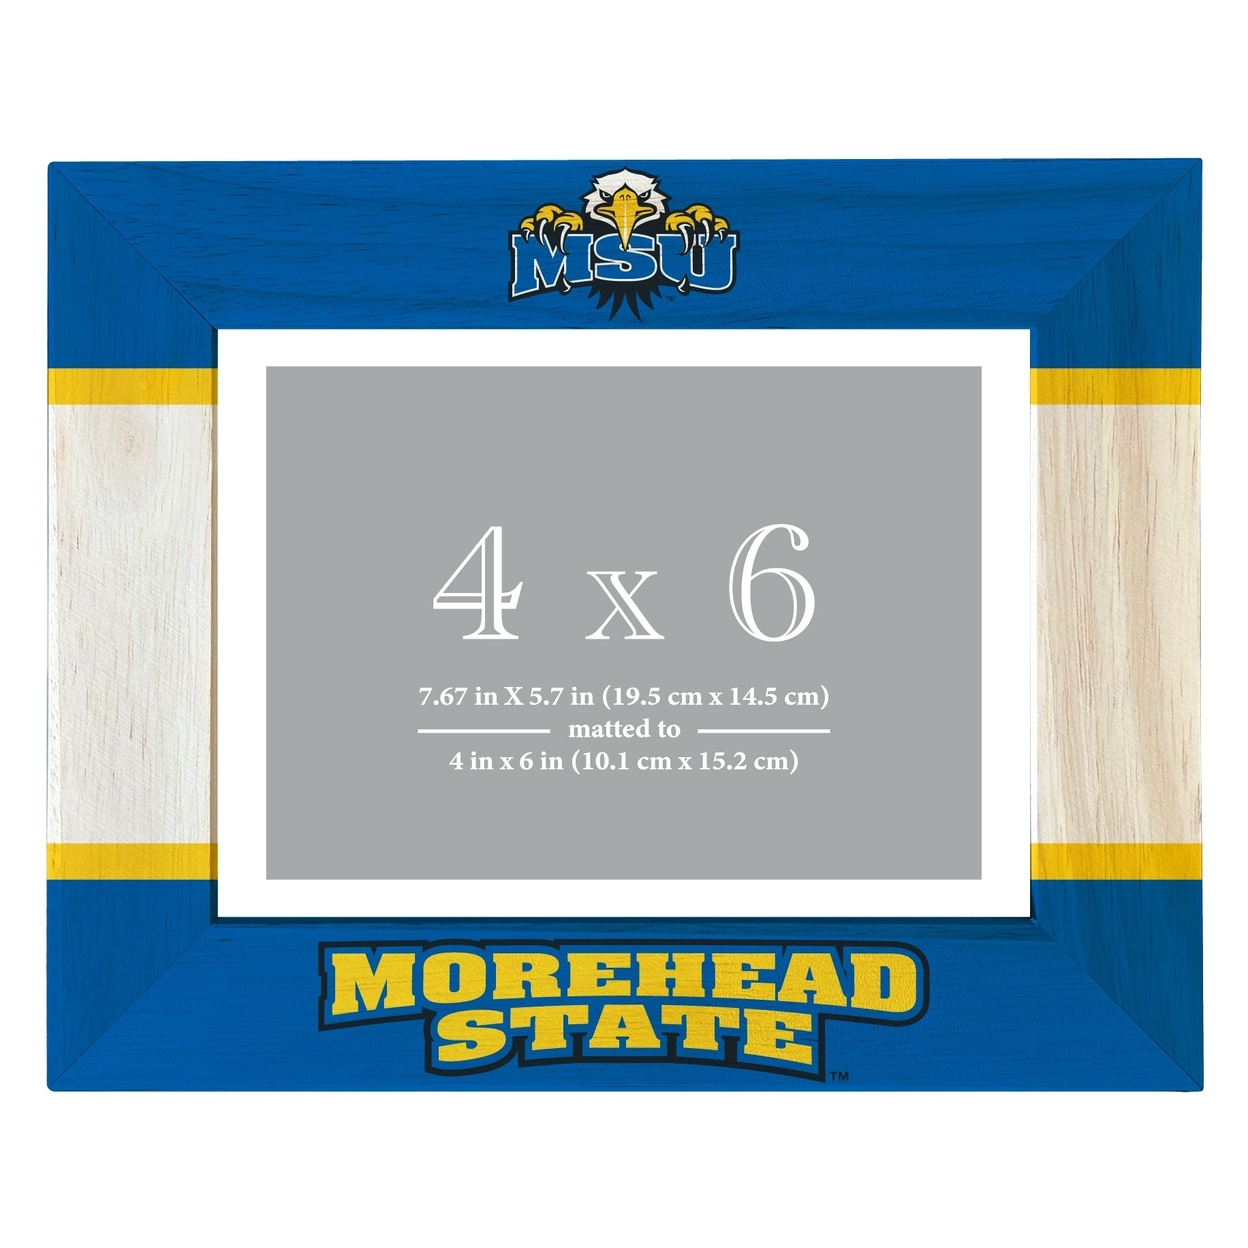 Morehead State University Wooden Photo Frame Matted To 4 X 6 Inch - Printed